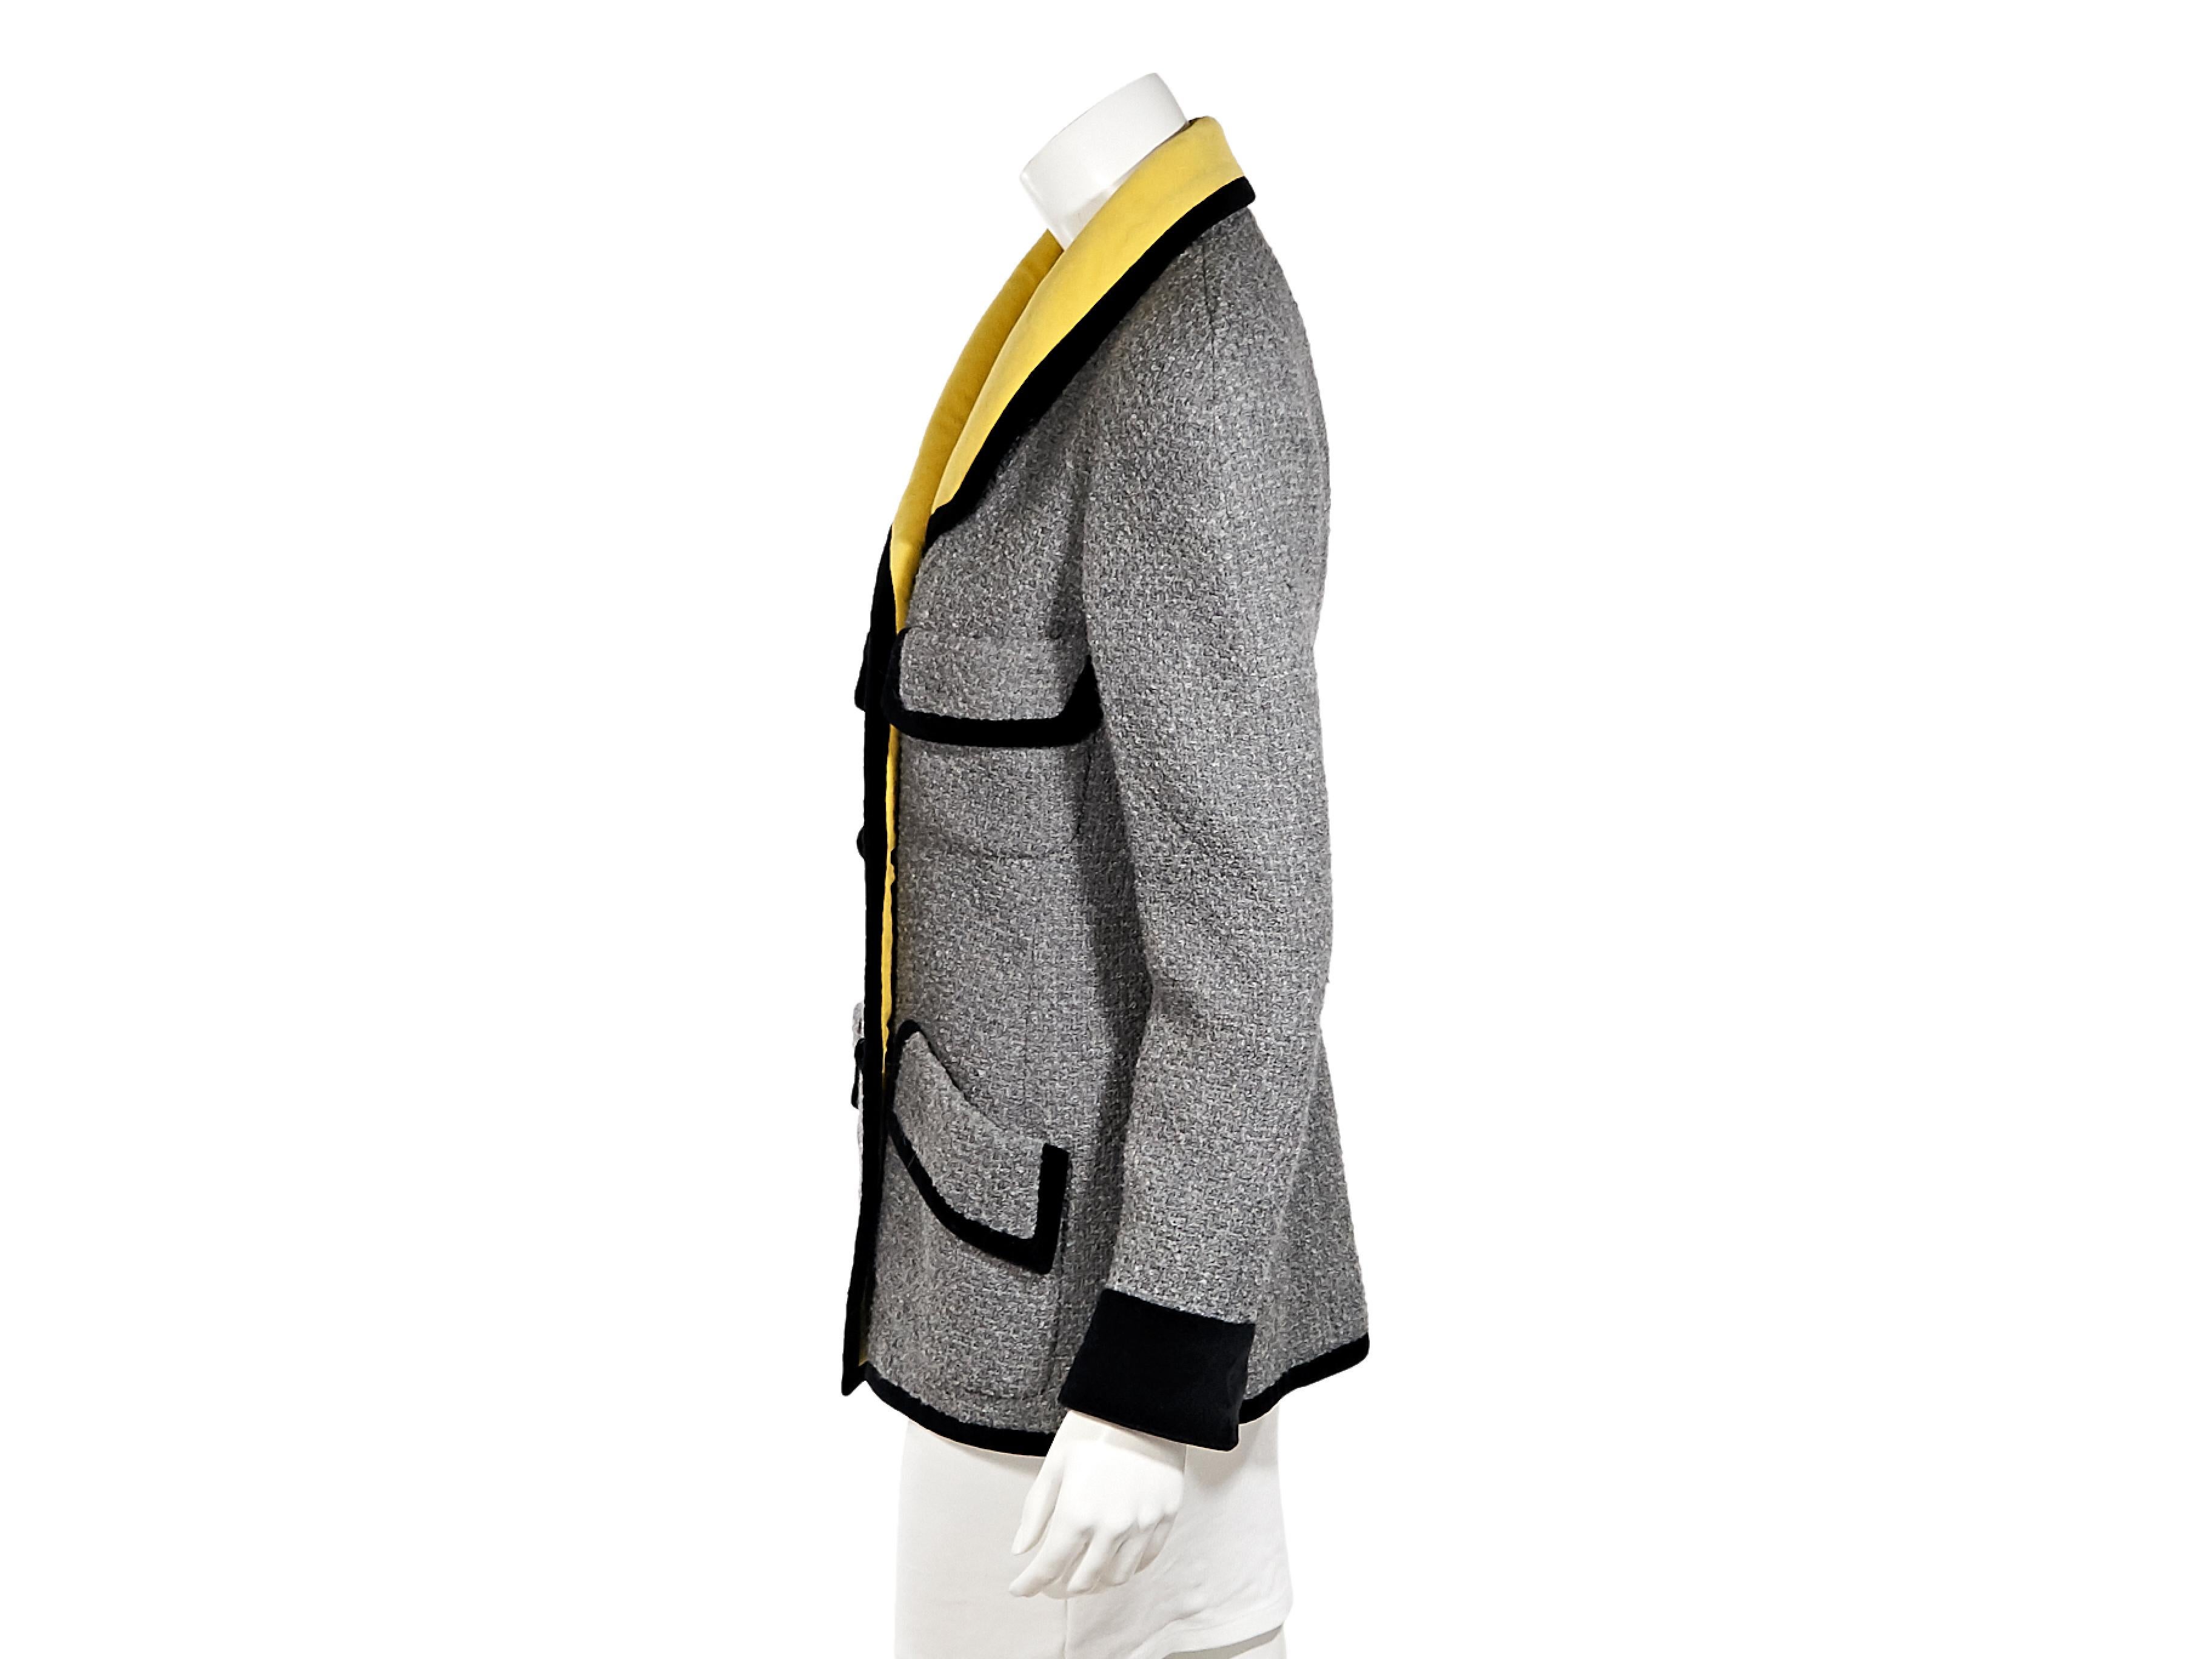 Product details:  Vintage grey tweed jacket by Chanel.  Trimmed with black velvet.  Spread yellow collar.  Long sleeves.  Double-breasted button-front closure.  Four front flap pockets.  34